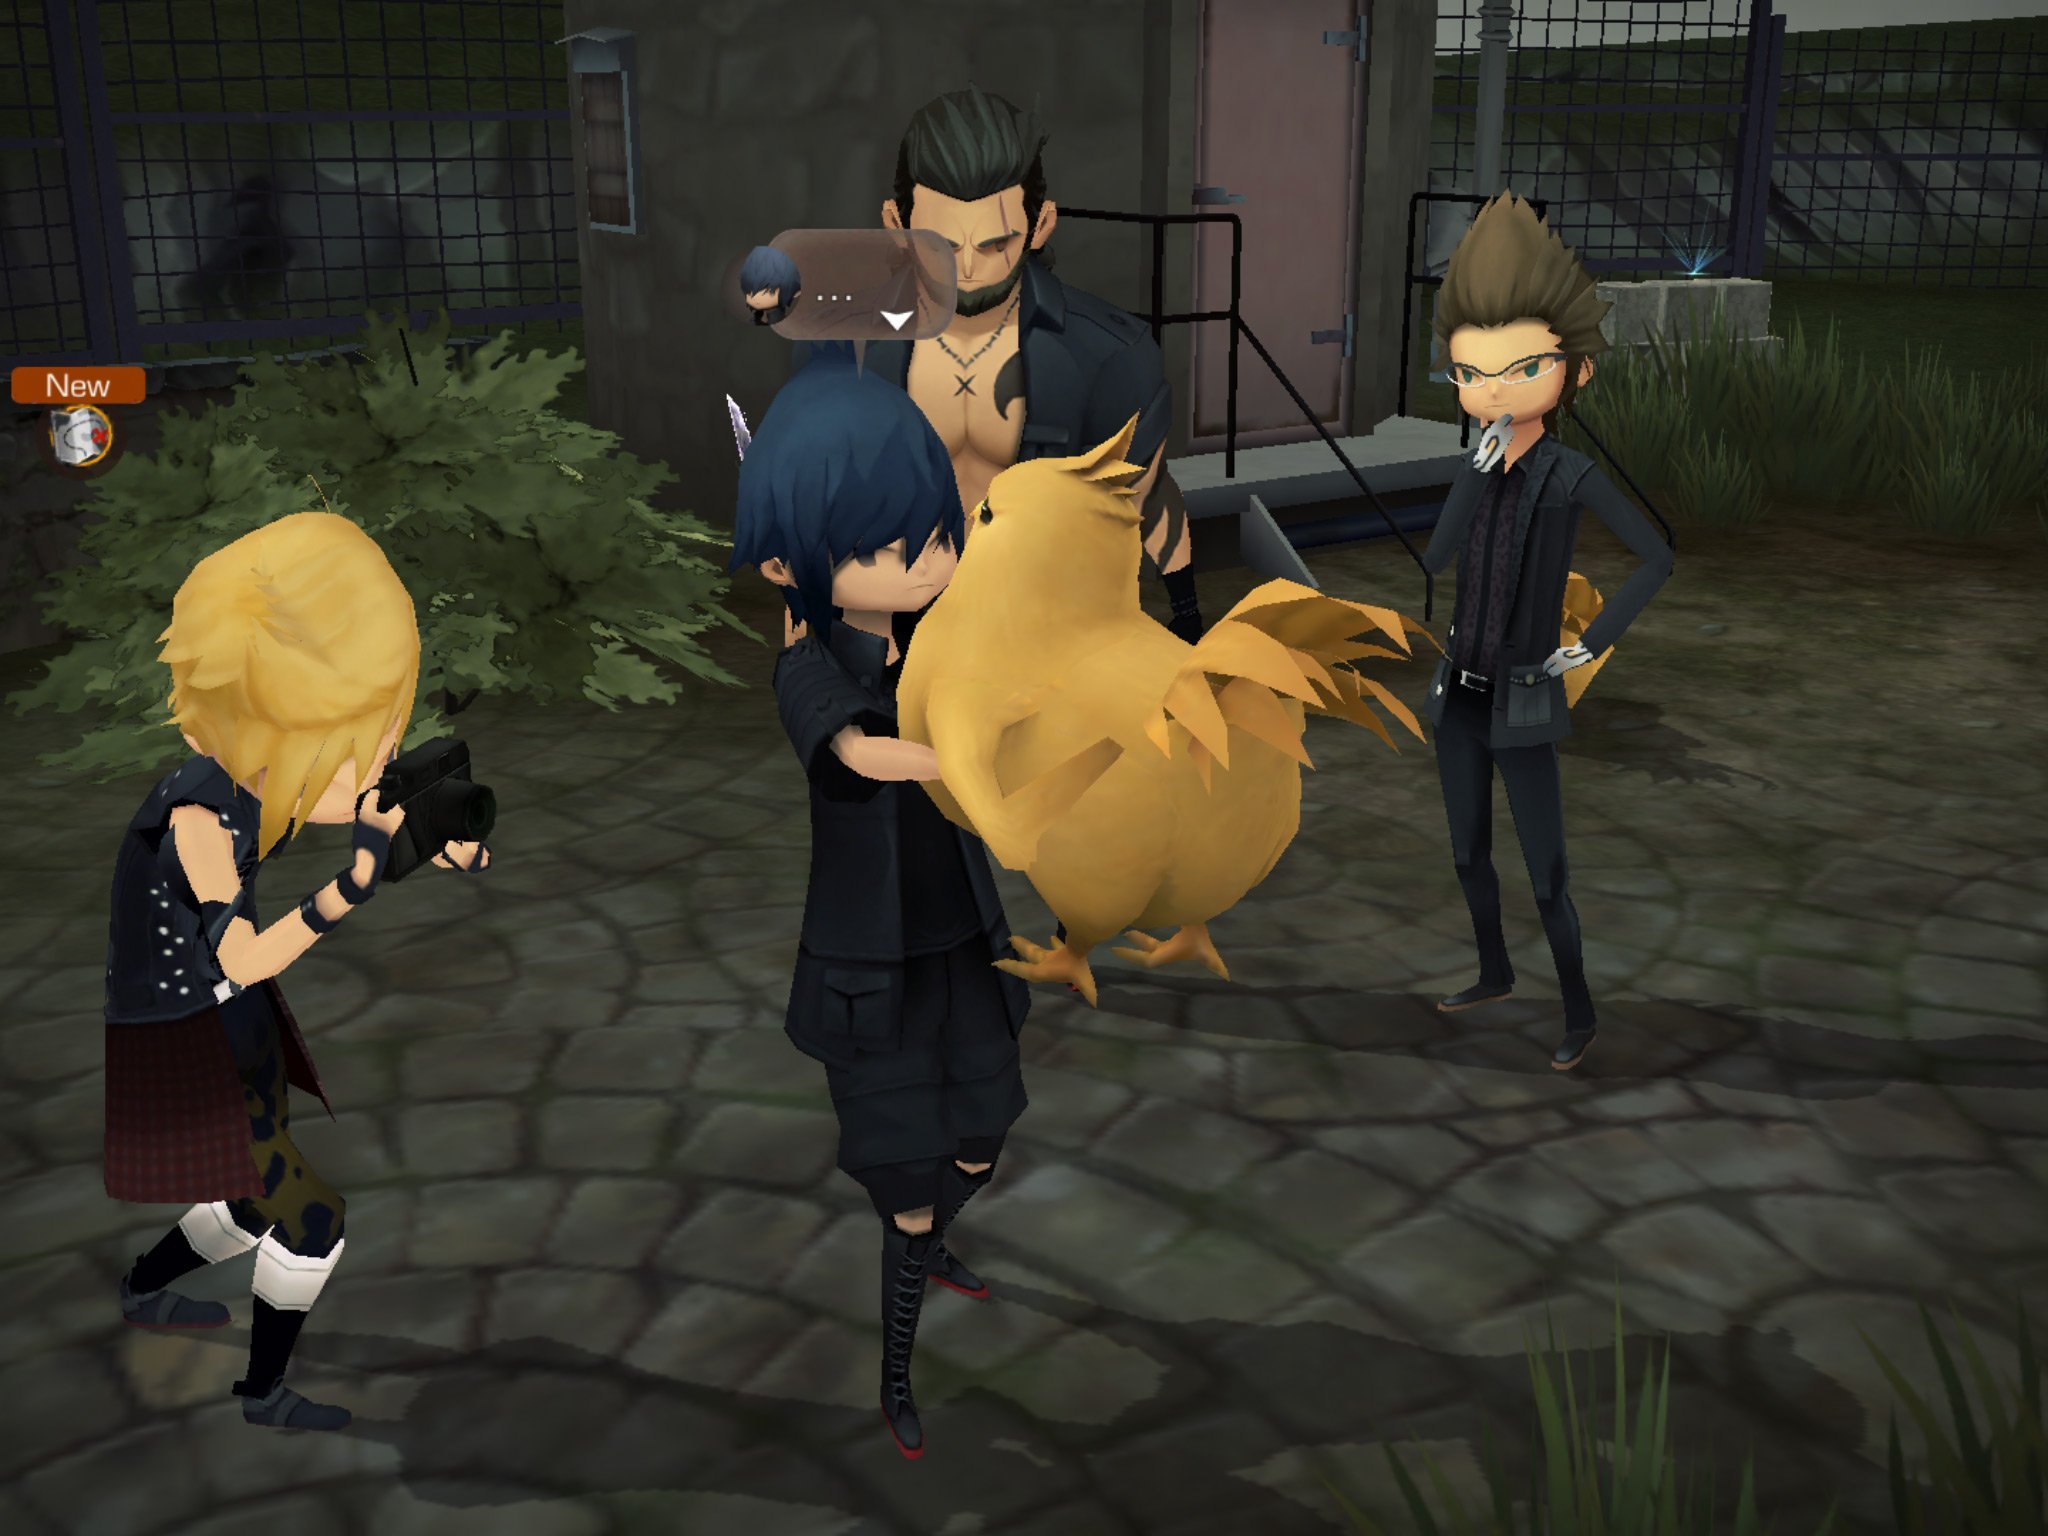 Stumbles aside, 'Final Fantasy XV' was worth the wait